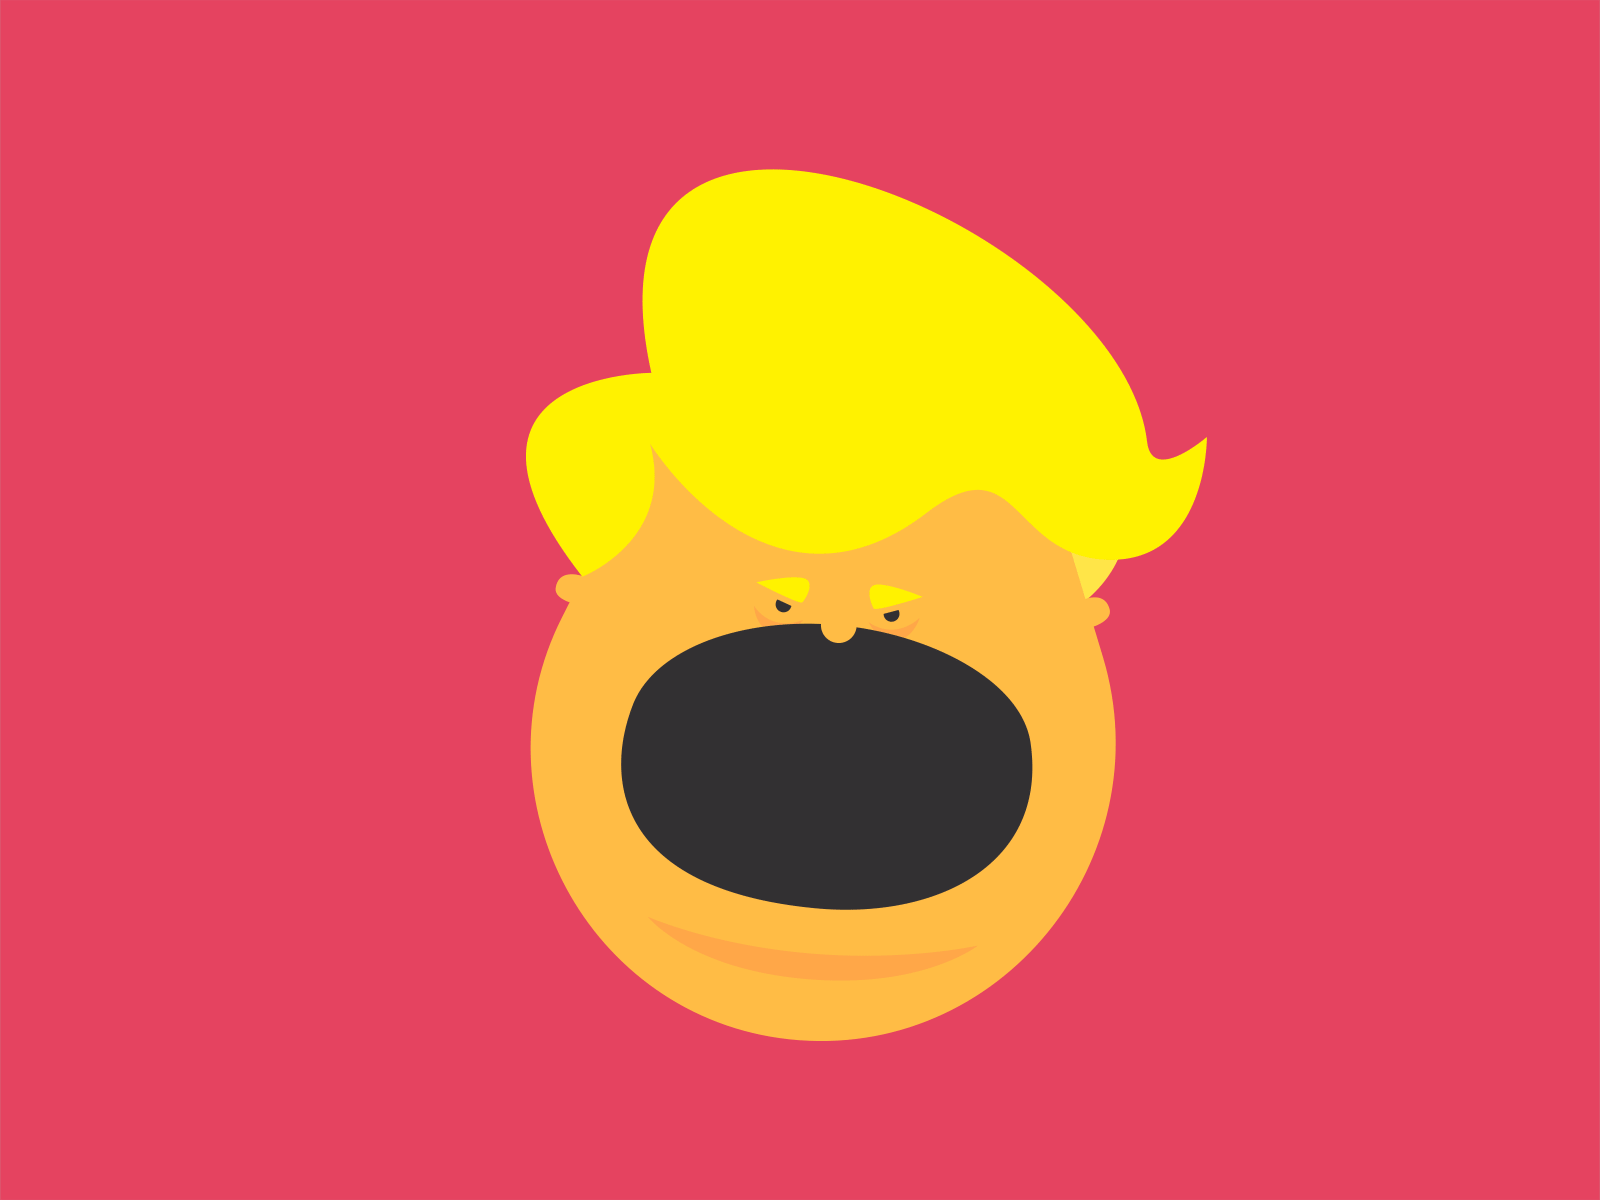 It's Christmas animated animation after effects christmas donald glover donald trump donaldtrump gif gif animated gif animation illustration present trump